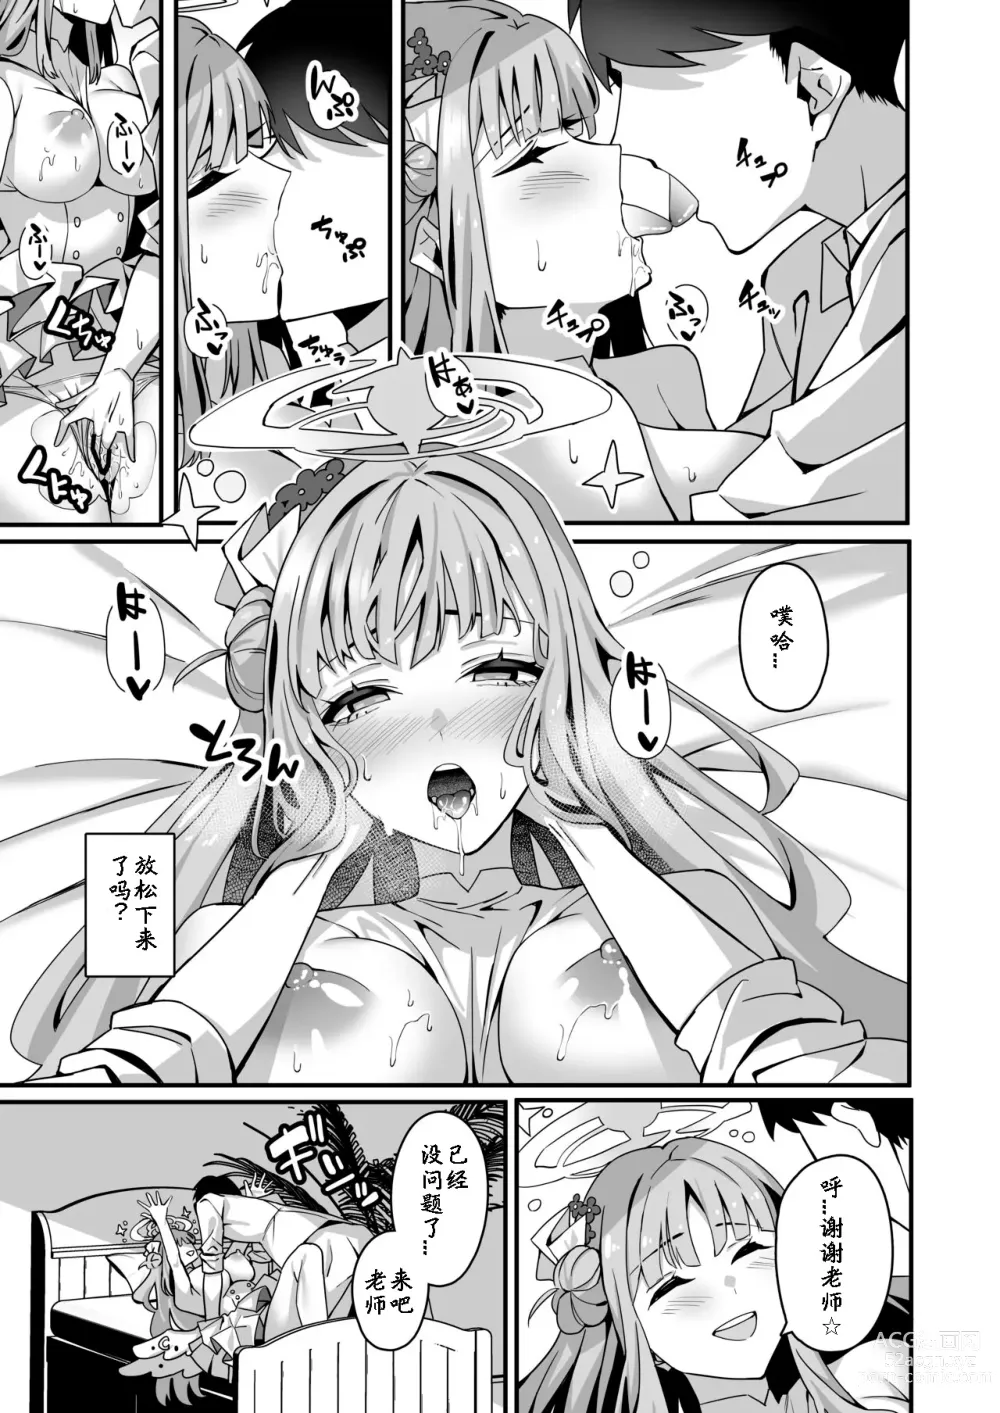 Page 8 of doujinshi Mika to Happy Love Love Sex Shite Haramaseru Hon - A book about happy loving sex with Mika and impregnation.